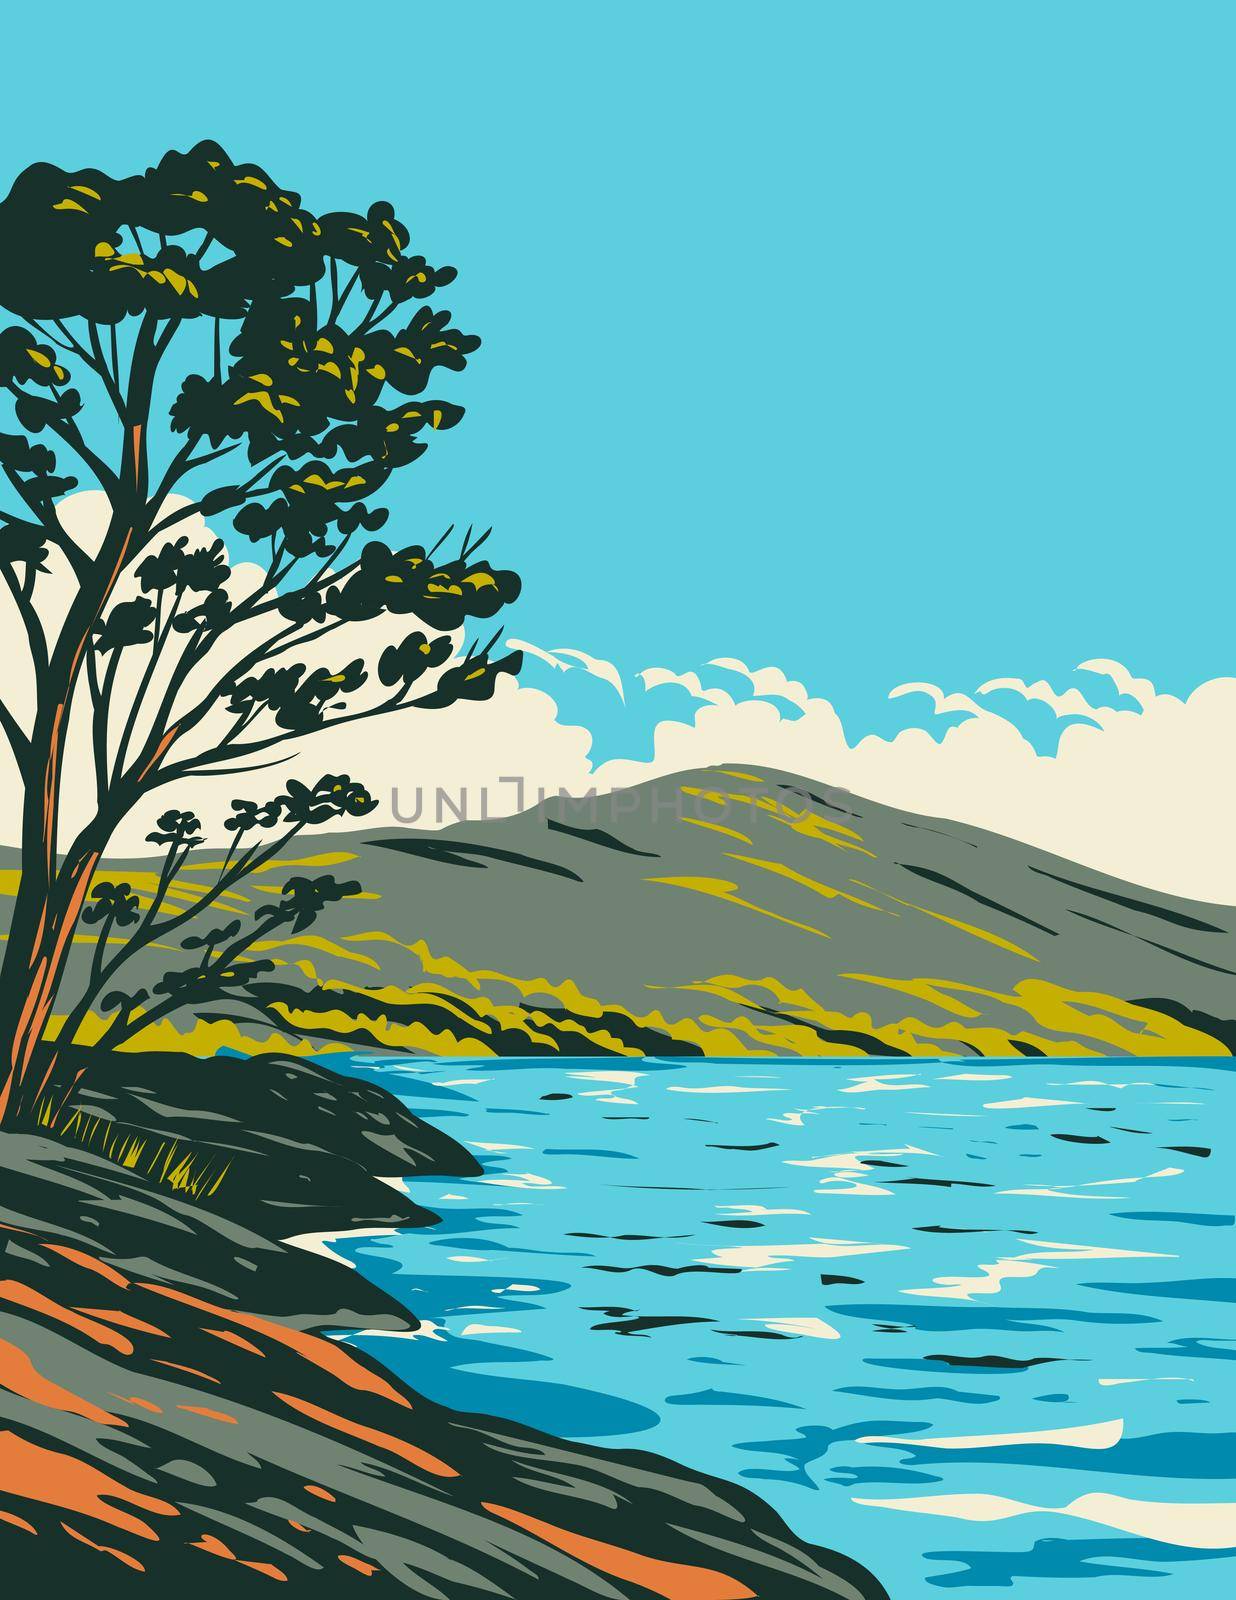 Art Deco or WPA poster of Inveruglas Isle located in Loch Lomond and the Trossachs National Park, Scotland, United Kingdom done in works project administration style.